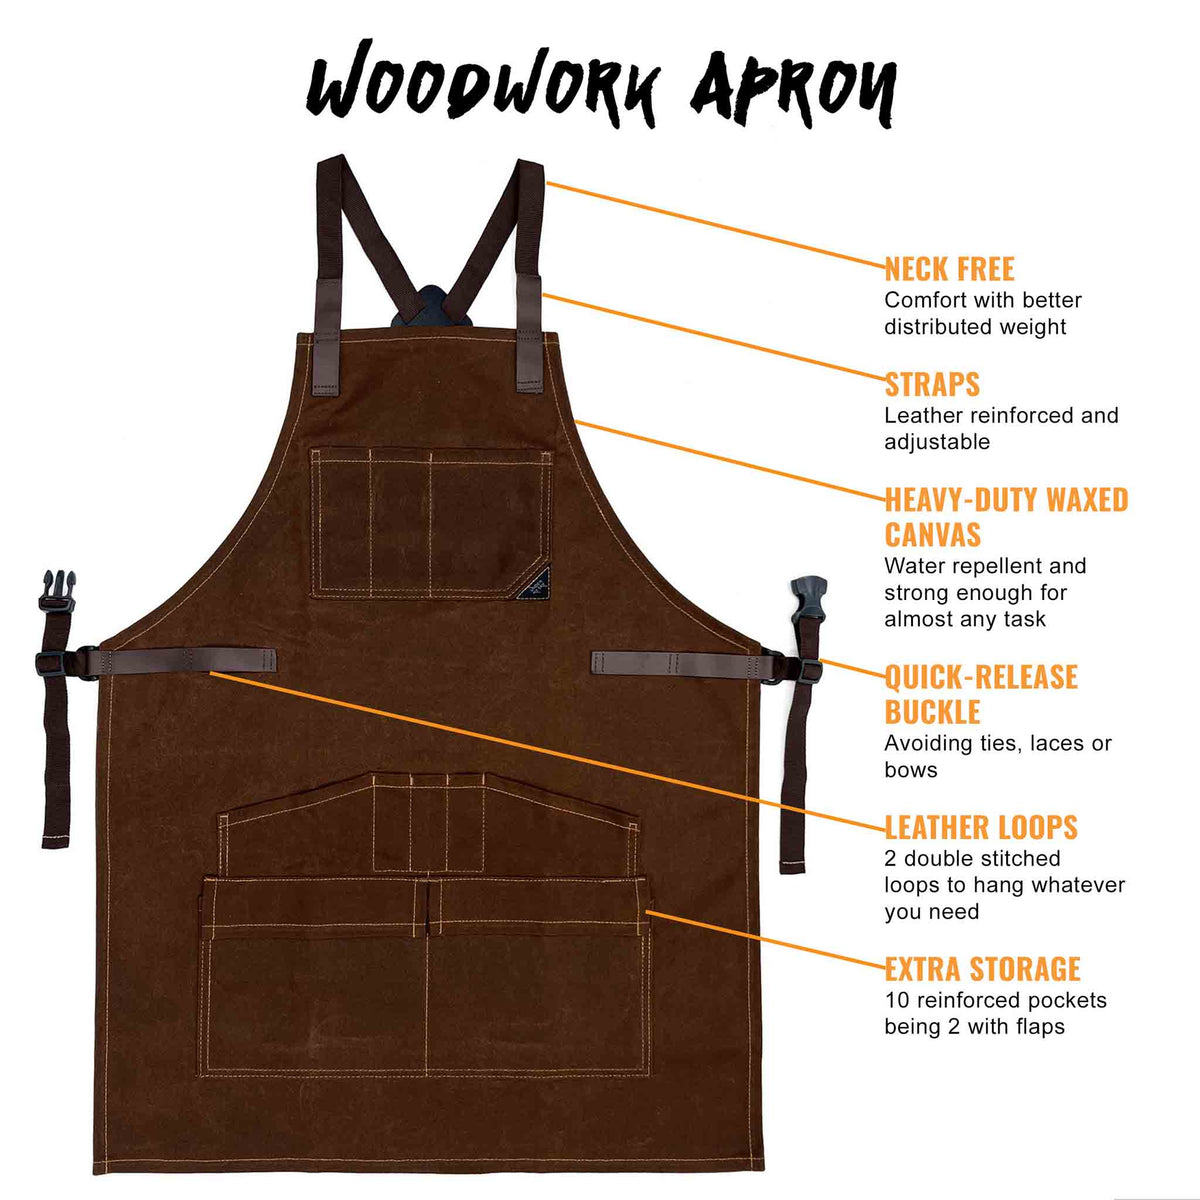 WoodWork Apron Features